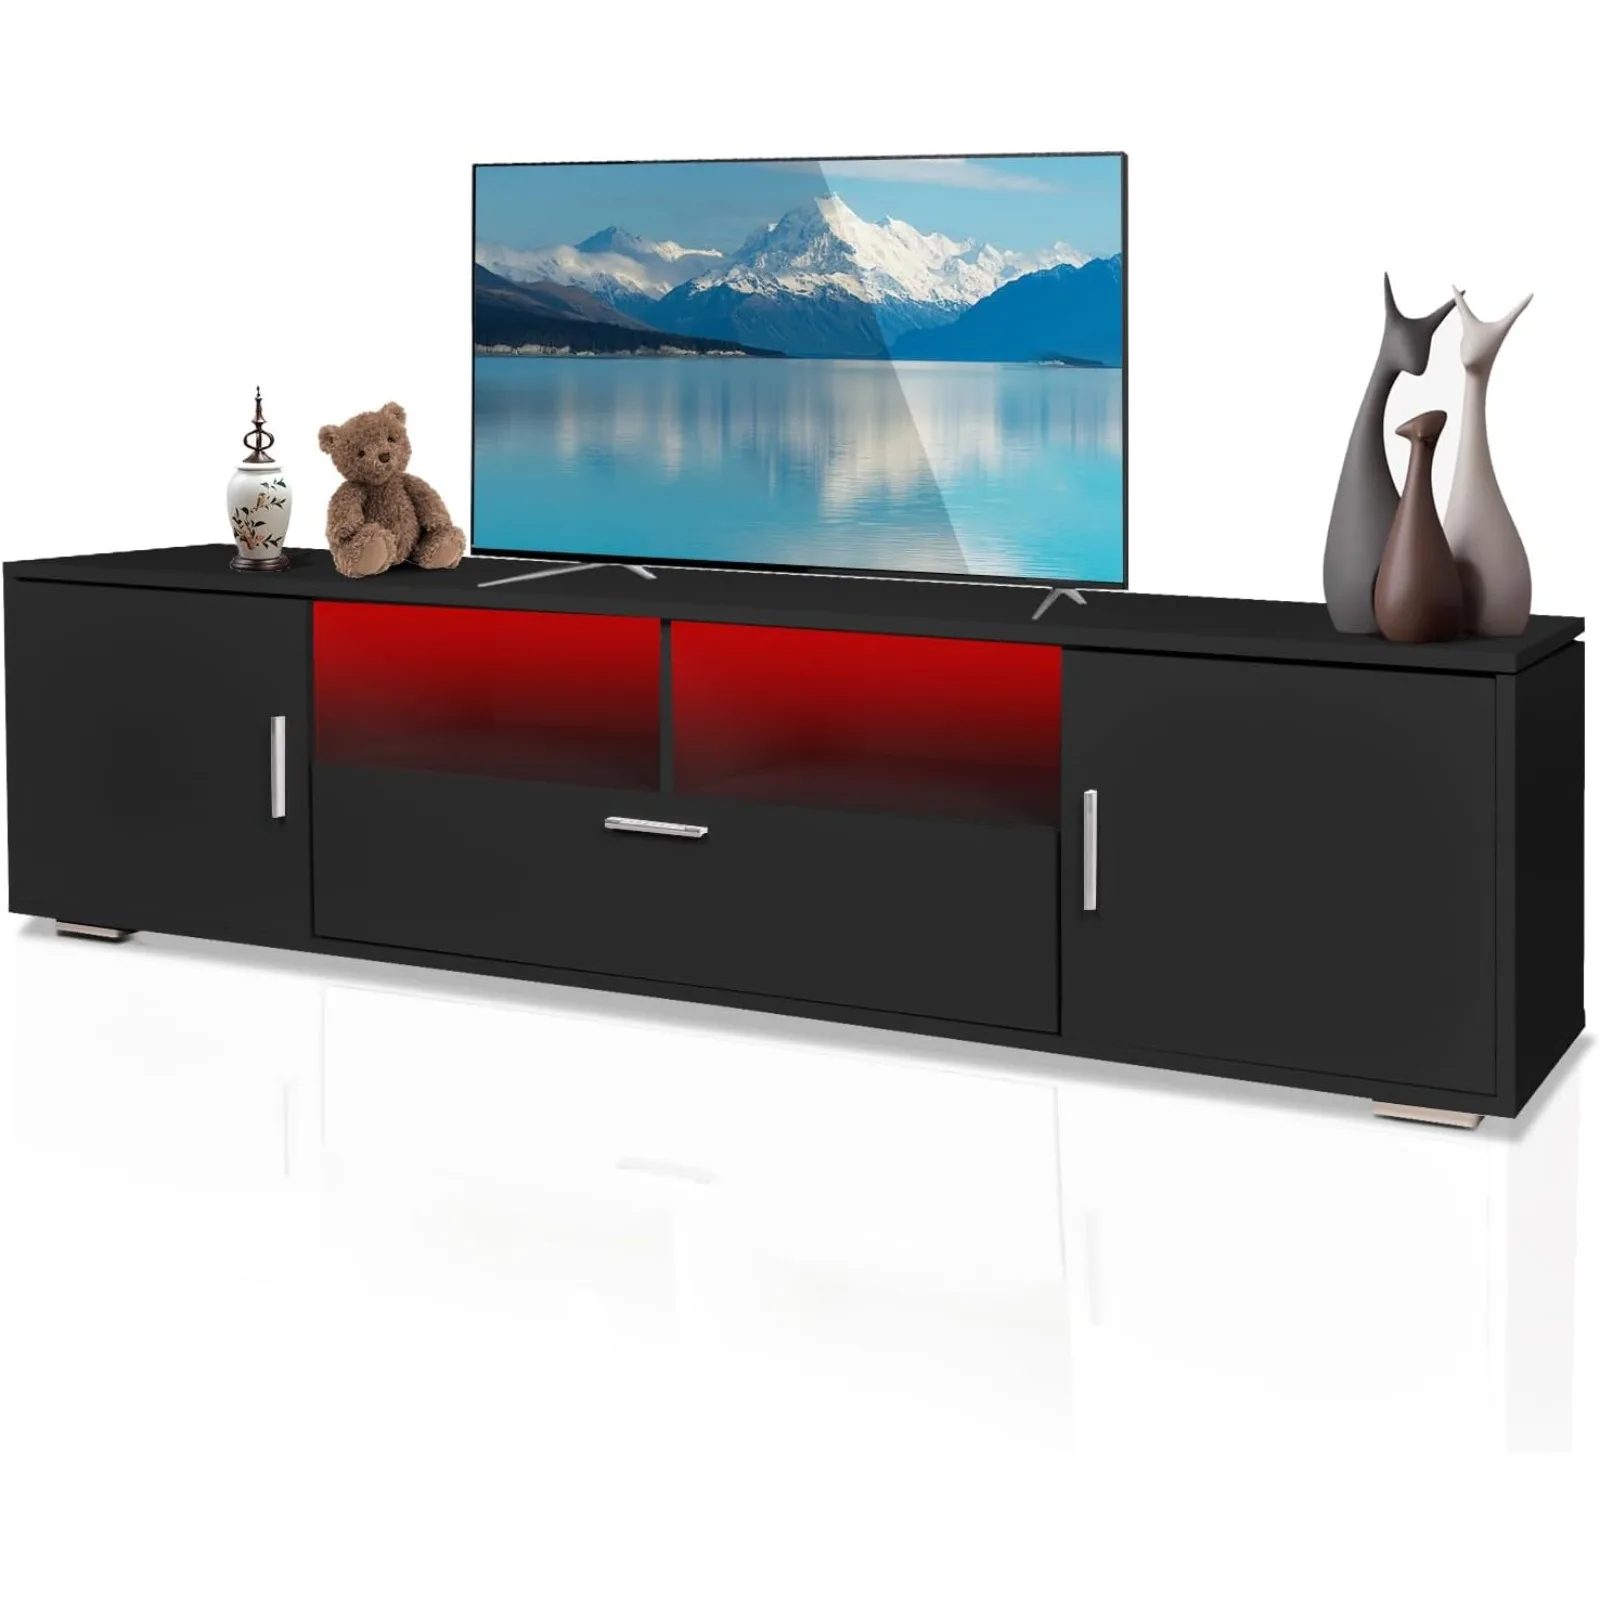 

Free shipping US HOUAGI LED TV Stand with Drawers and Storage Cabinet,Modern High Gloss Entertainment Center for TVs Up to 70”,